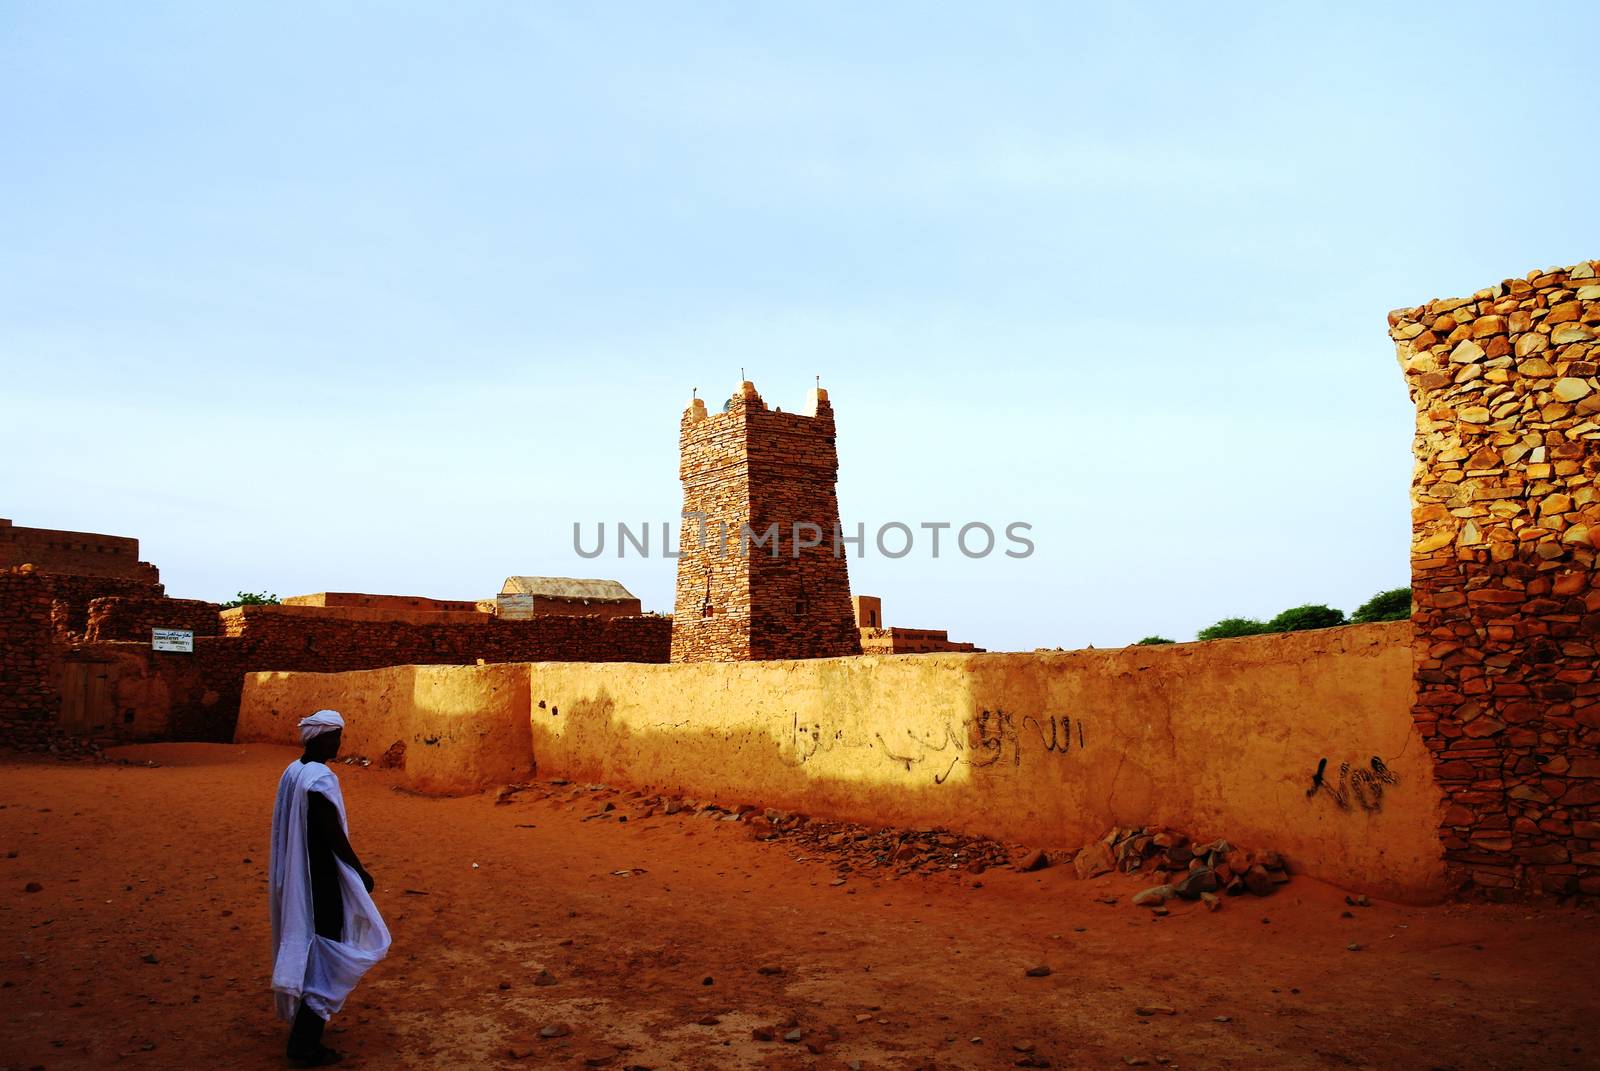 Chinguetti mosque, one of the symbols of Mauritania